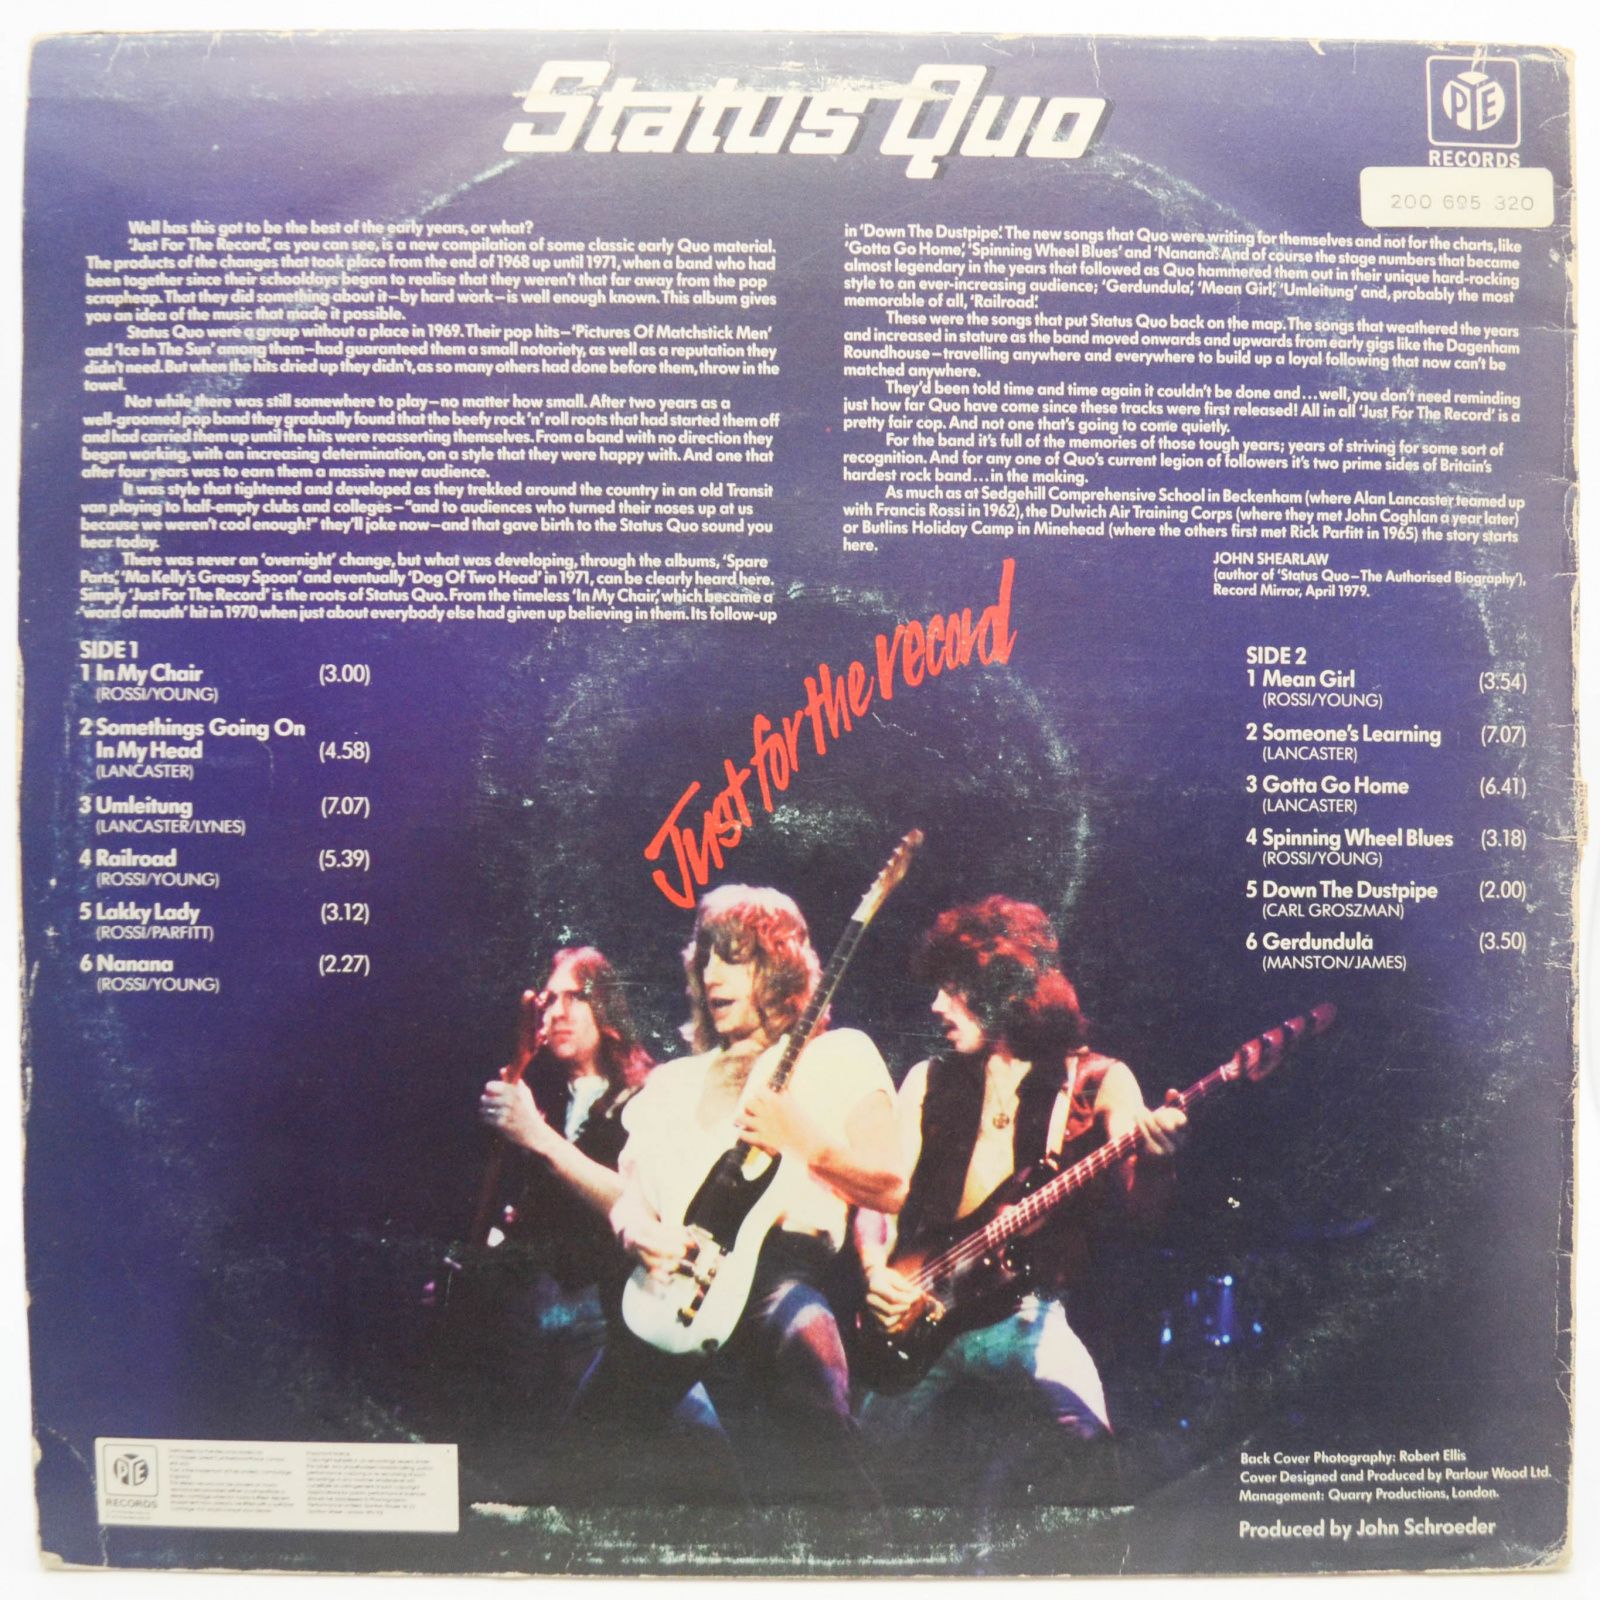 Status Quo — Just For The Record (UK), 1979